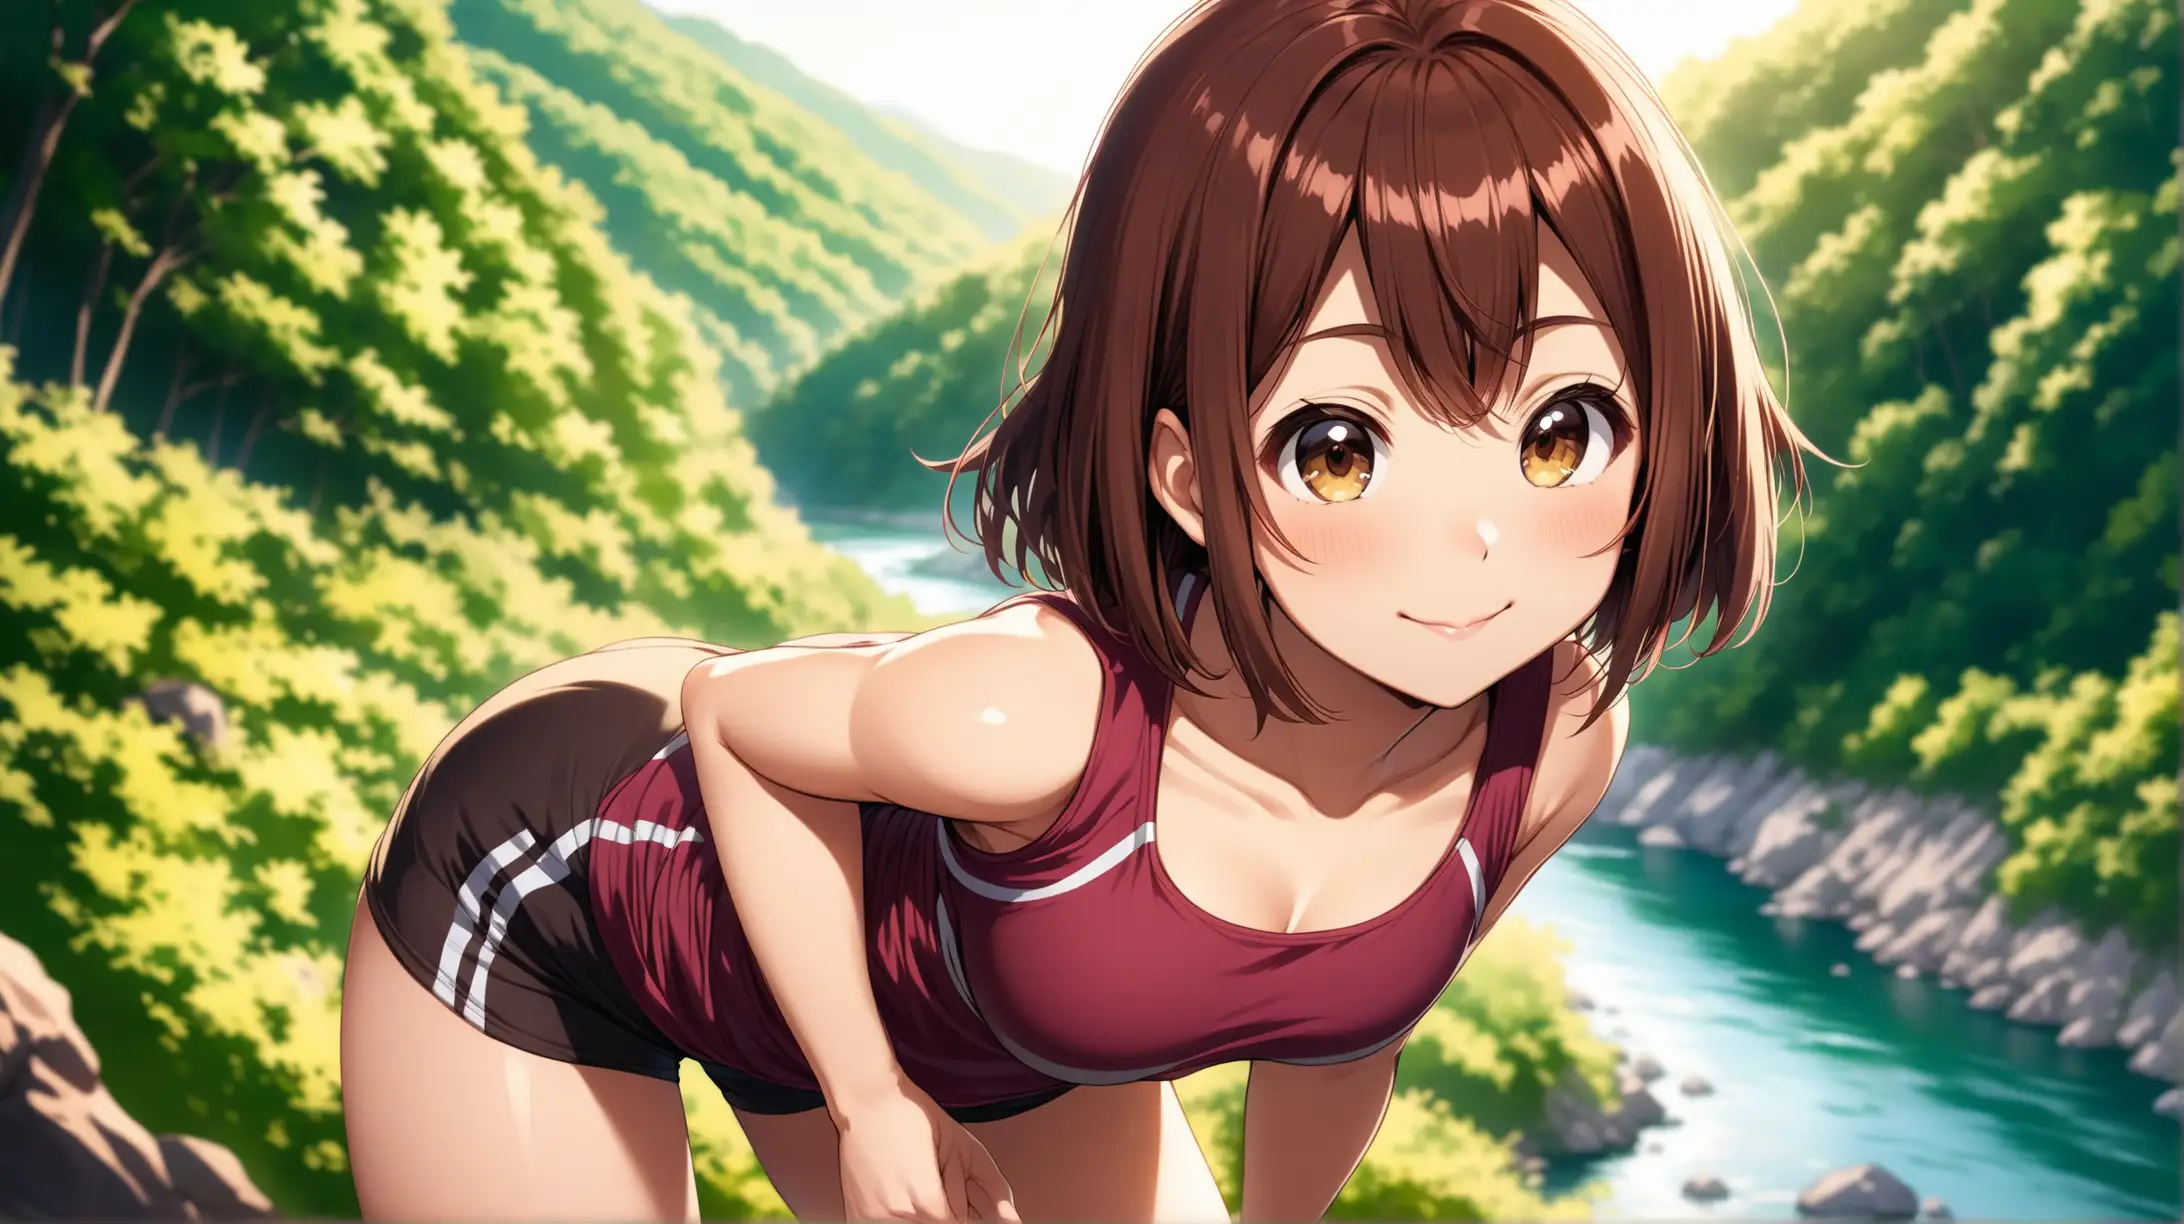 Draw the character Ochaco Uraraka, brown hair, dark brown eyes, high quality, long shot, ambient lighting, outdoors, hiking trail, river, seductive pose, athletic outfit, closed-lip smile